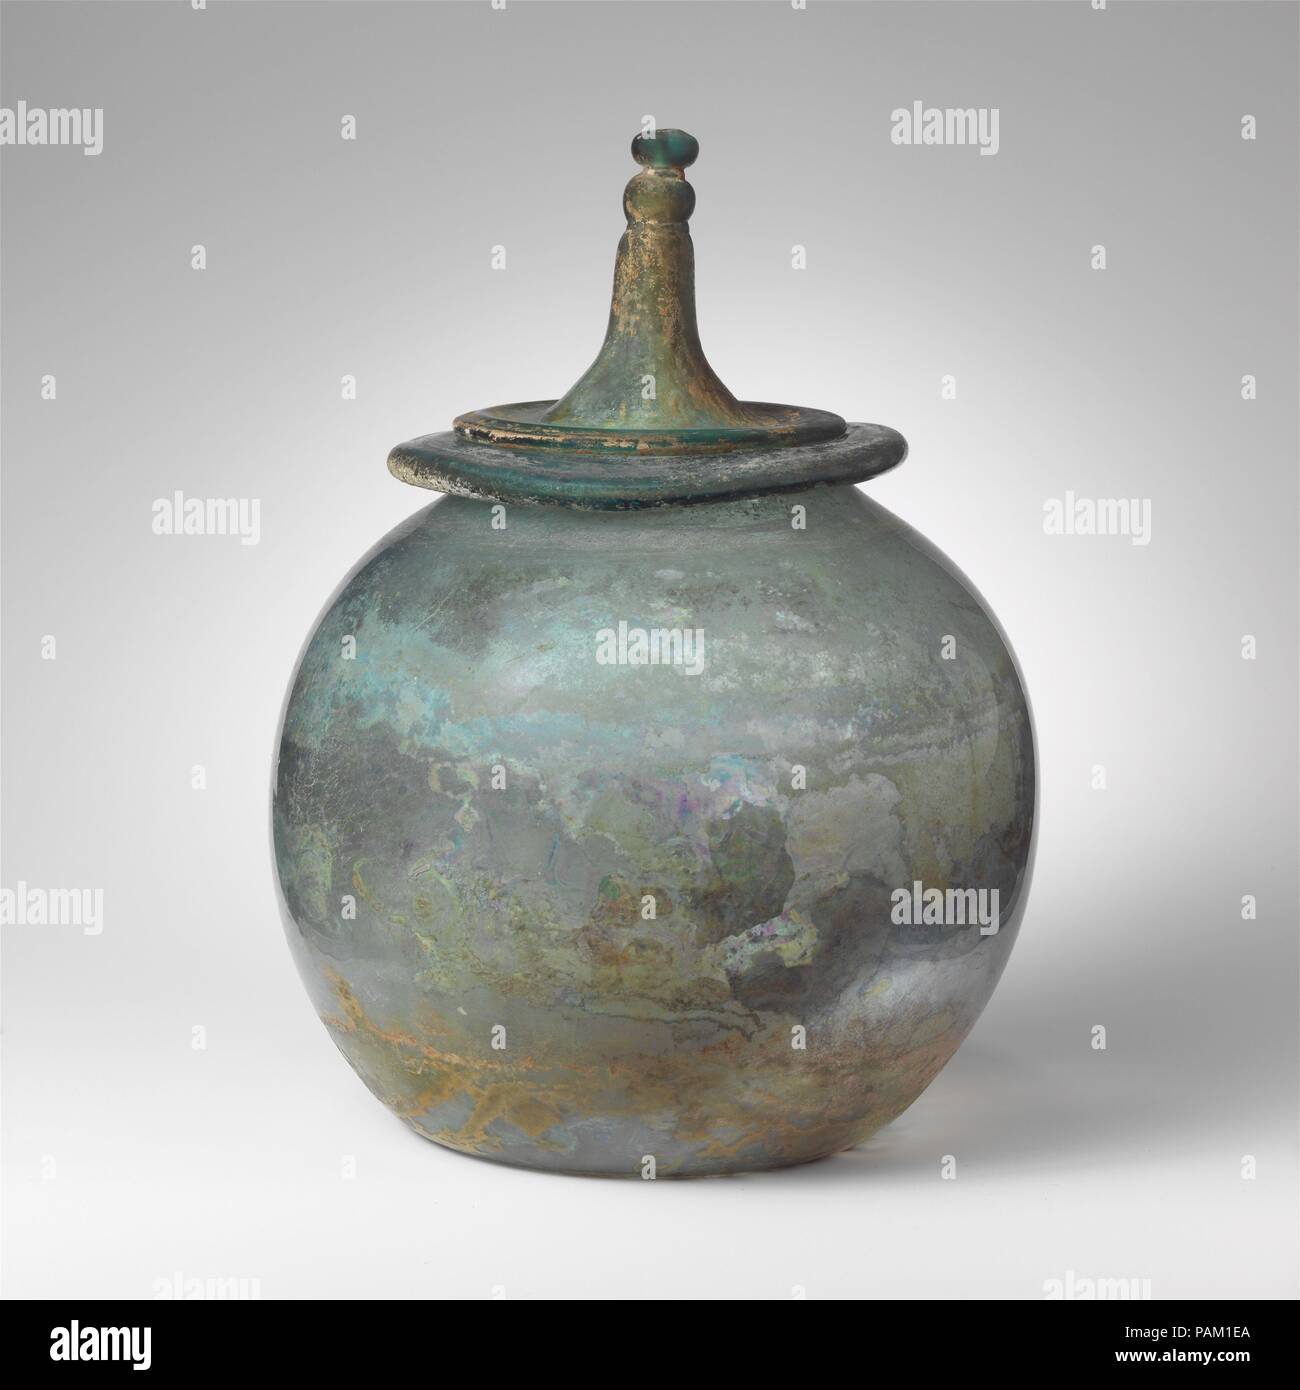 Glass Cinerary Urn With Lid Culture Roman Dimensions H 12 1 8 In 30 8 Cm Date 1st